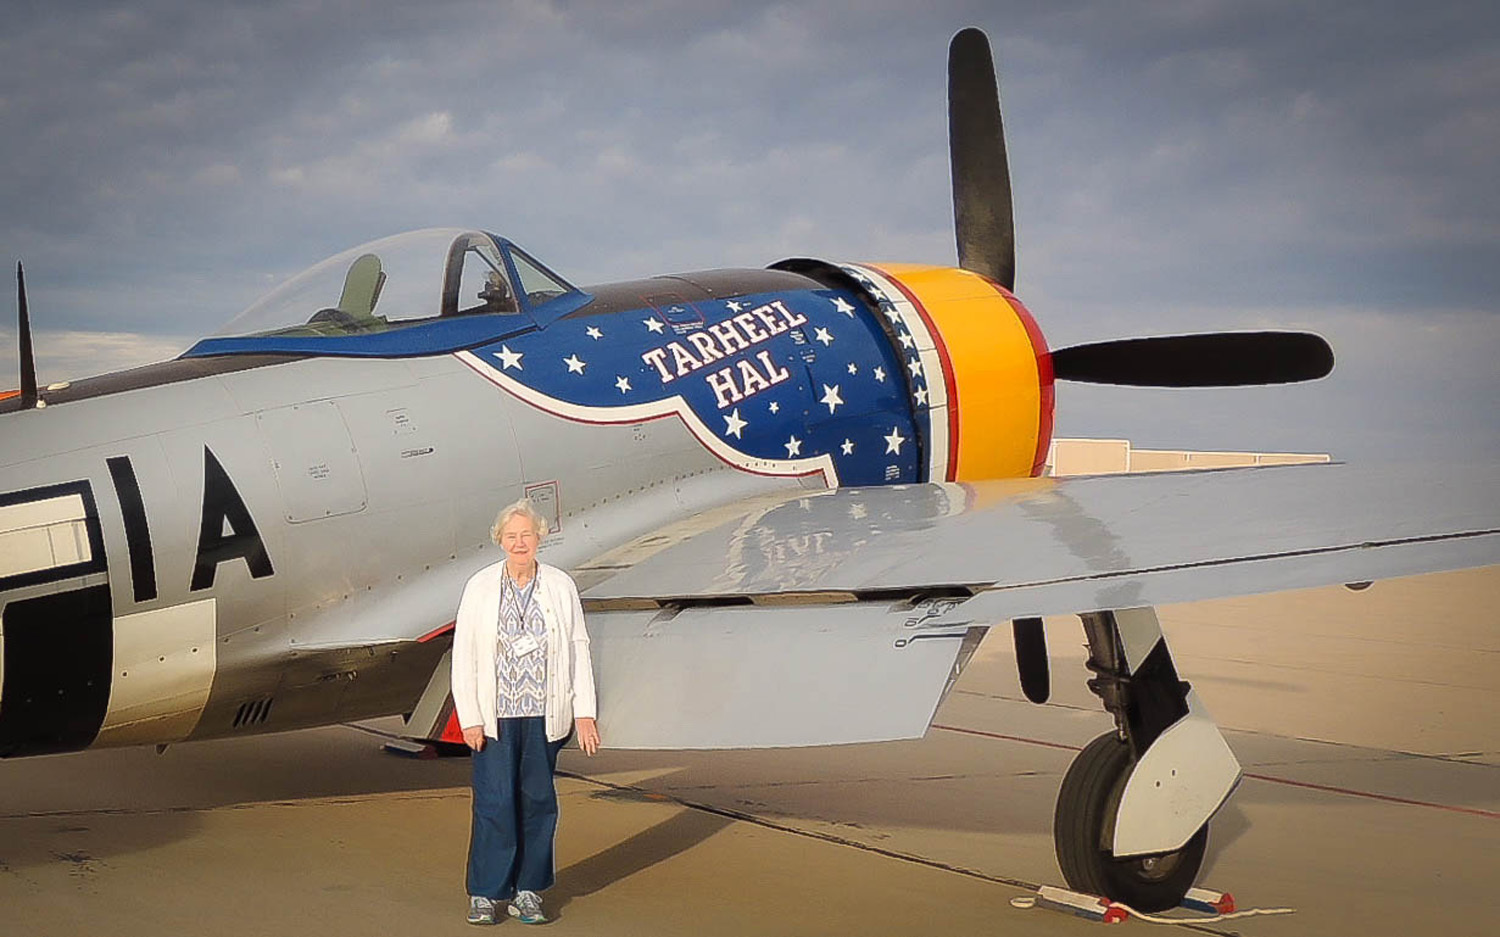 Victoria Thomson stands next to a P-47 Thunderbolt before an Air Force Heritage Flight demonstration on March 6, 2016 at Davis-Monthan Air Force Base, Ariz. Thomson’s father, Capt. Carl Ekstrom, was killed during World War II while piloting a P-47. After nearly seven decades, Thomson finally came face-to face with the Thunderbolt. (Courtesy photo)